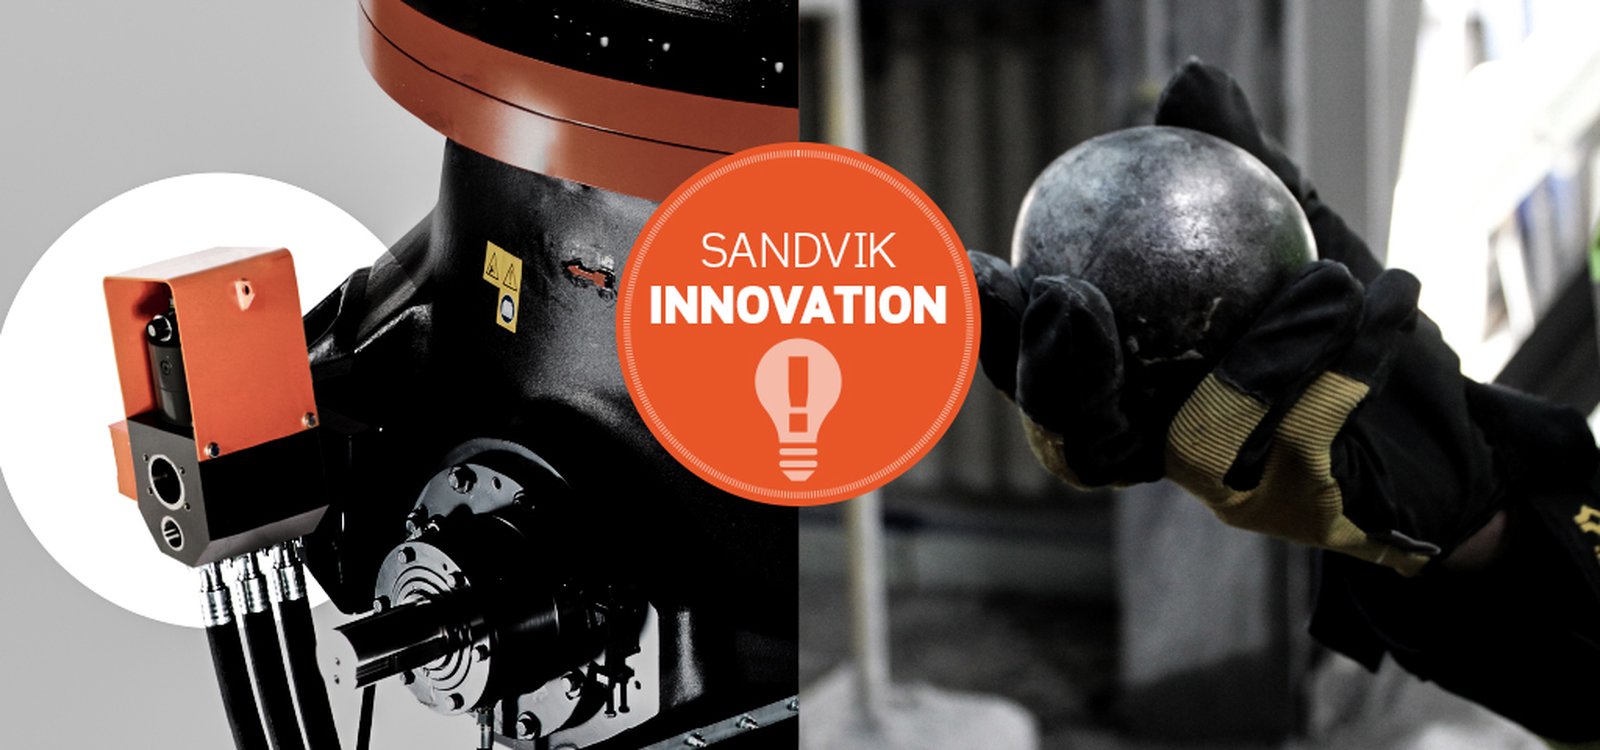 The patented Sandvik electric dump valve system helps avoid damage to cone crushers while providing safer working conditions and major process improvements.